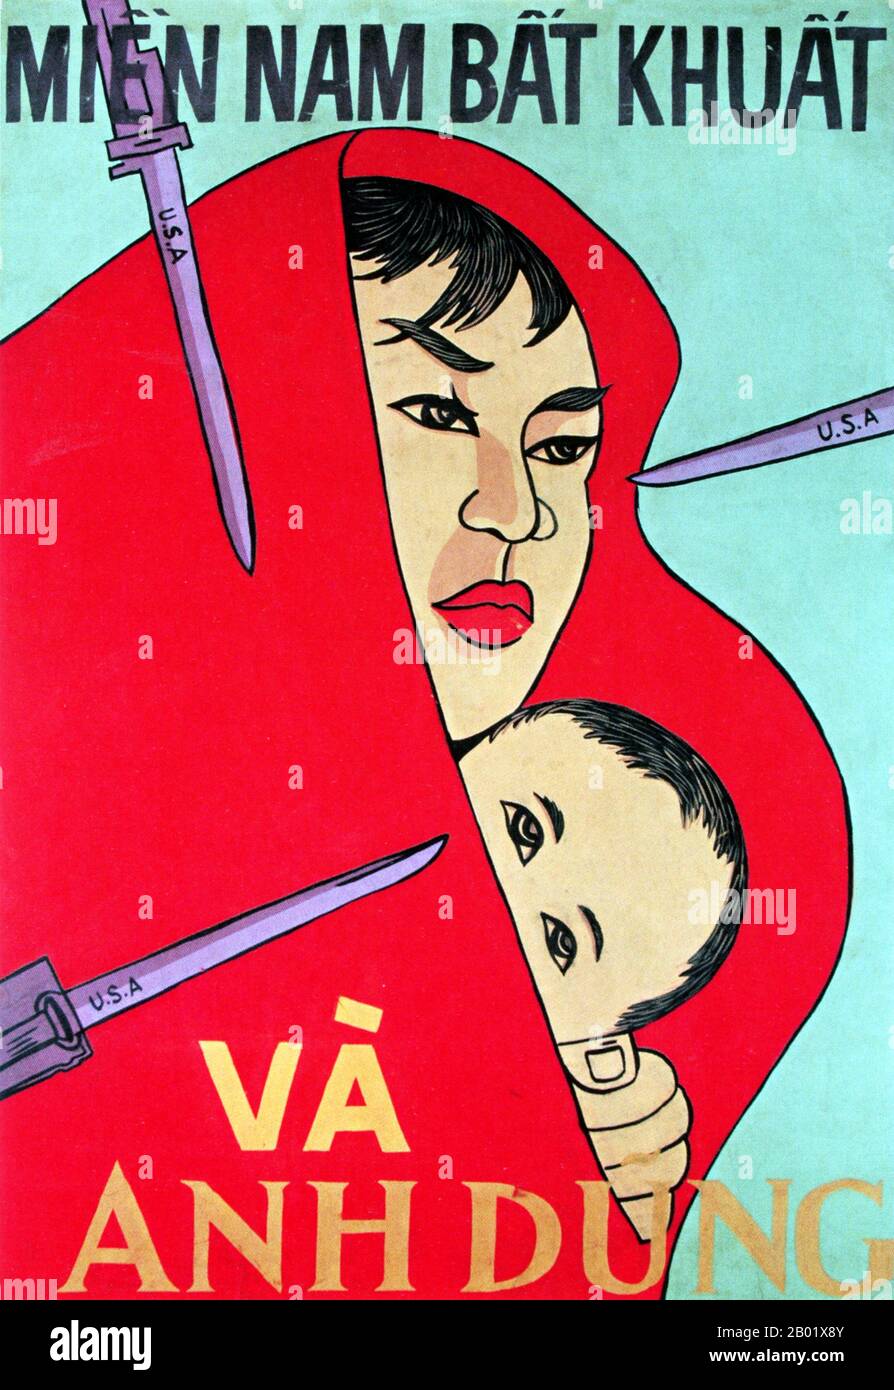 Vietnam: 'The Indomitable and Heroic South'. National Liberation Front propaganda poster, 1963.  The Vietcong (Vietnamese: Việt cộng), or National Liberation Front (NLF), was a political organisation and army in South Vietnam and Cambodia that fought the United States and South Vietnamese governments during the Vietnam War (1959-1975). It had both guerrilla and regular army units, as well as a network of cadres who organised peasants in the territory it controlled.  Many soldiers were recruited in South Vietnam, but others were attached to the People's Army of Vietnam (PAVN). Stock Photo